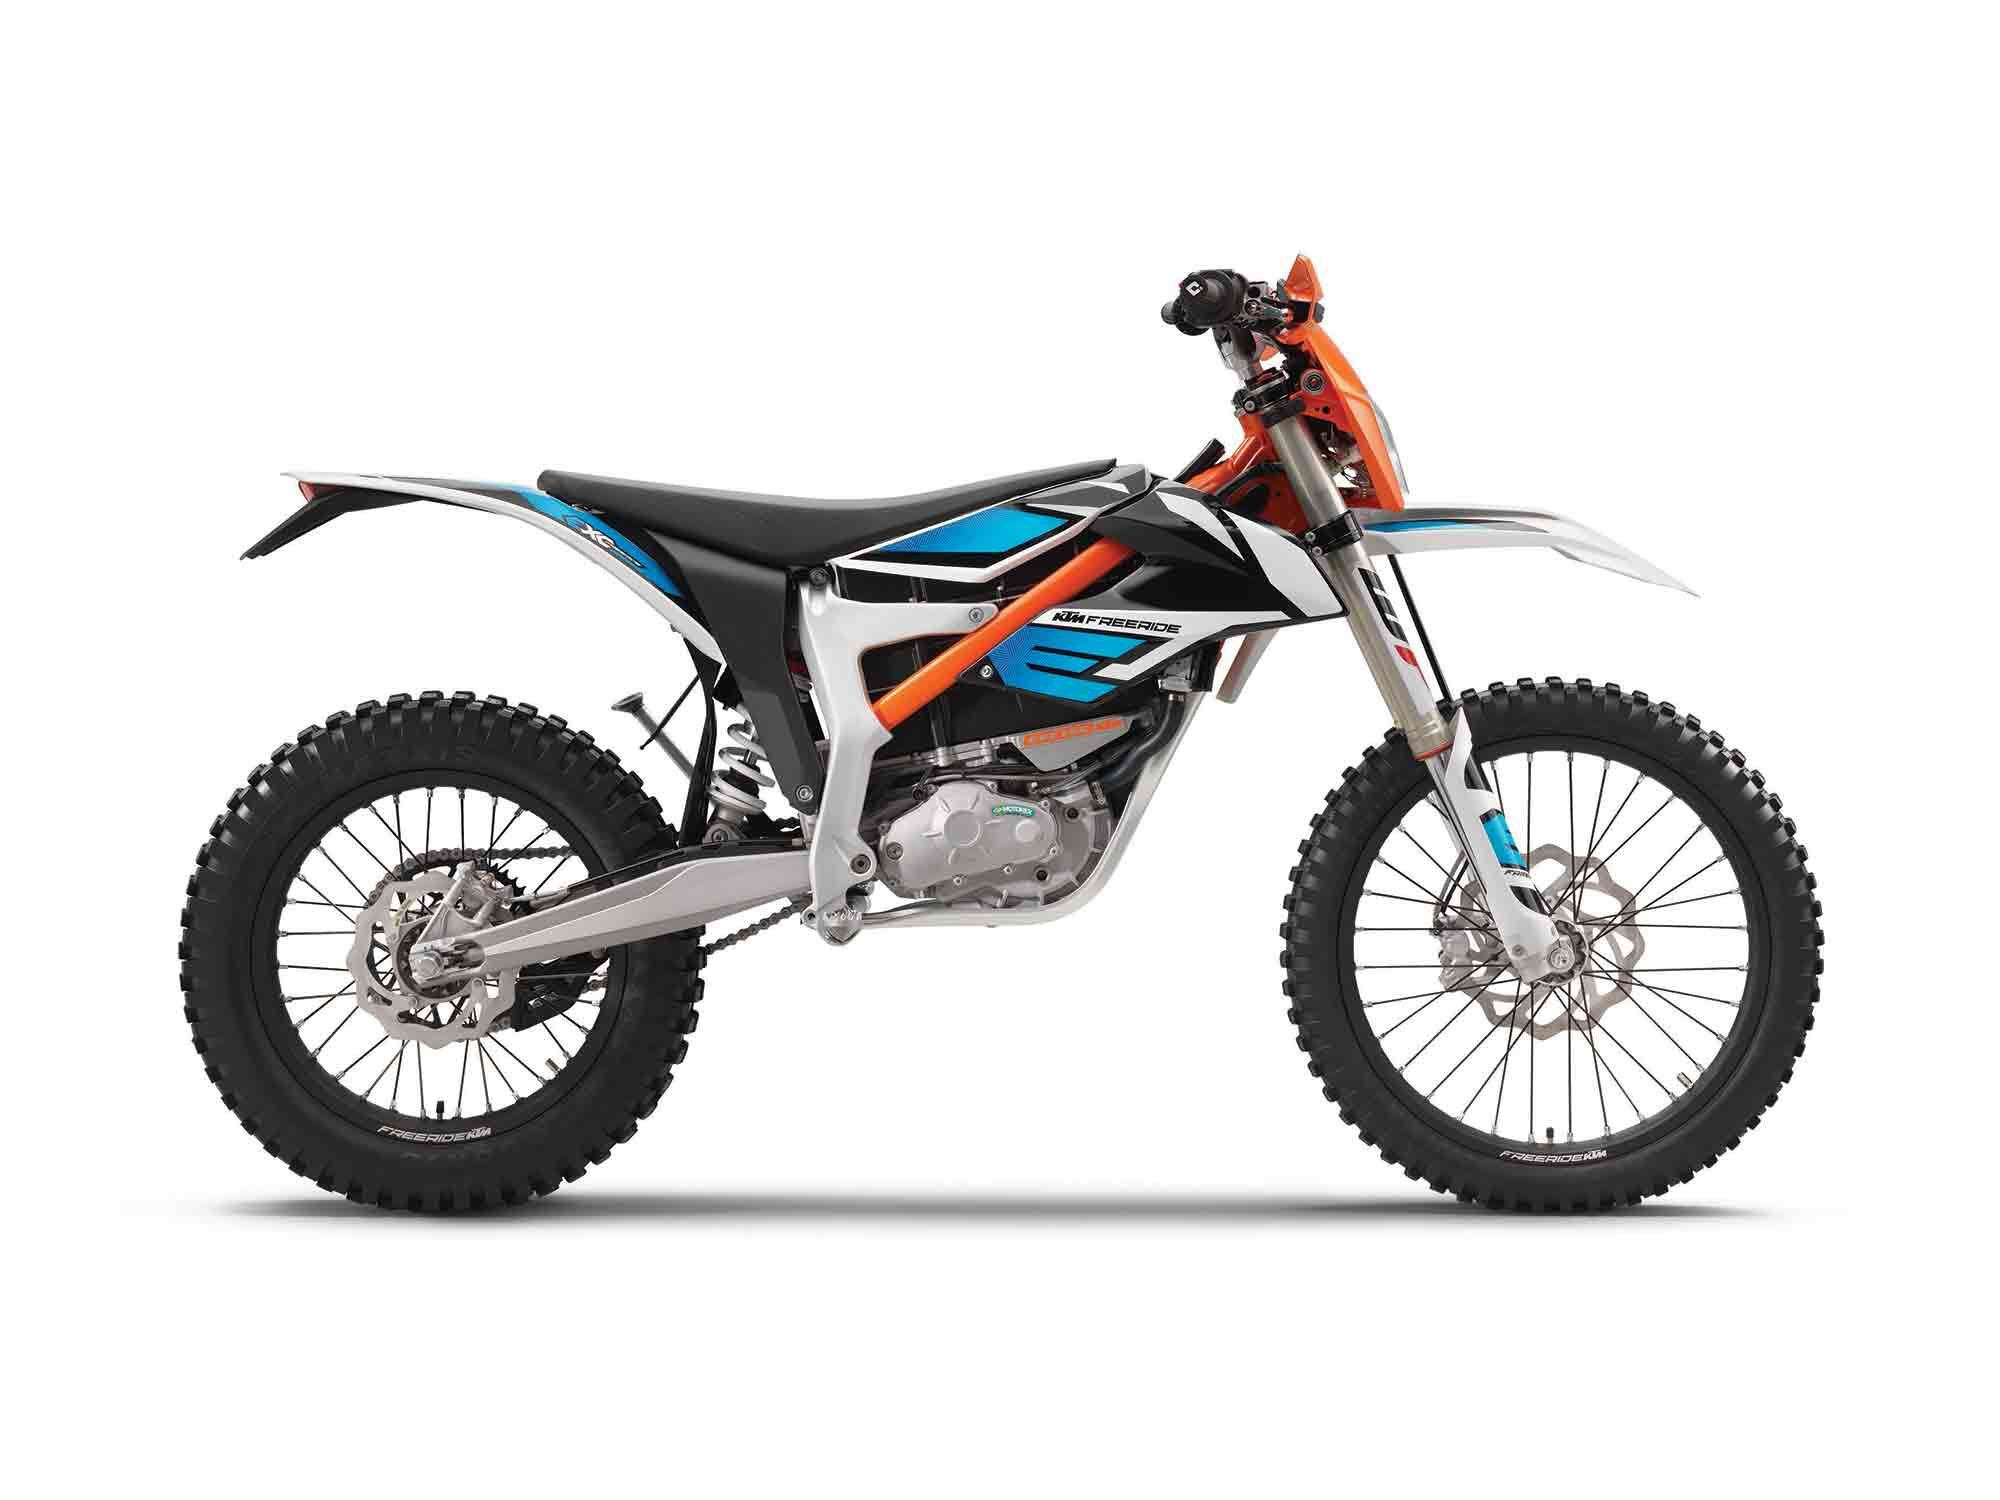 KTM believes that electric bikes can only really replace motorcycles up to 250cc, anything beyond that will require eFuels in the future.